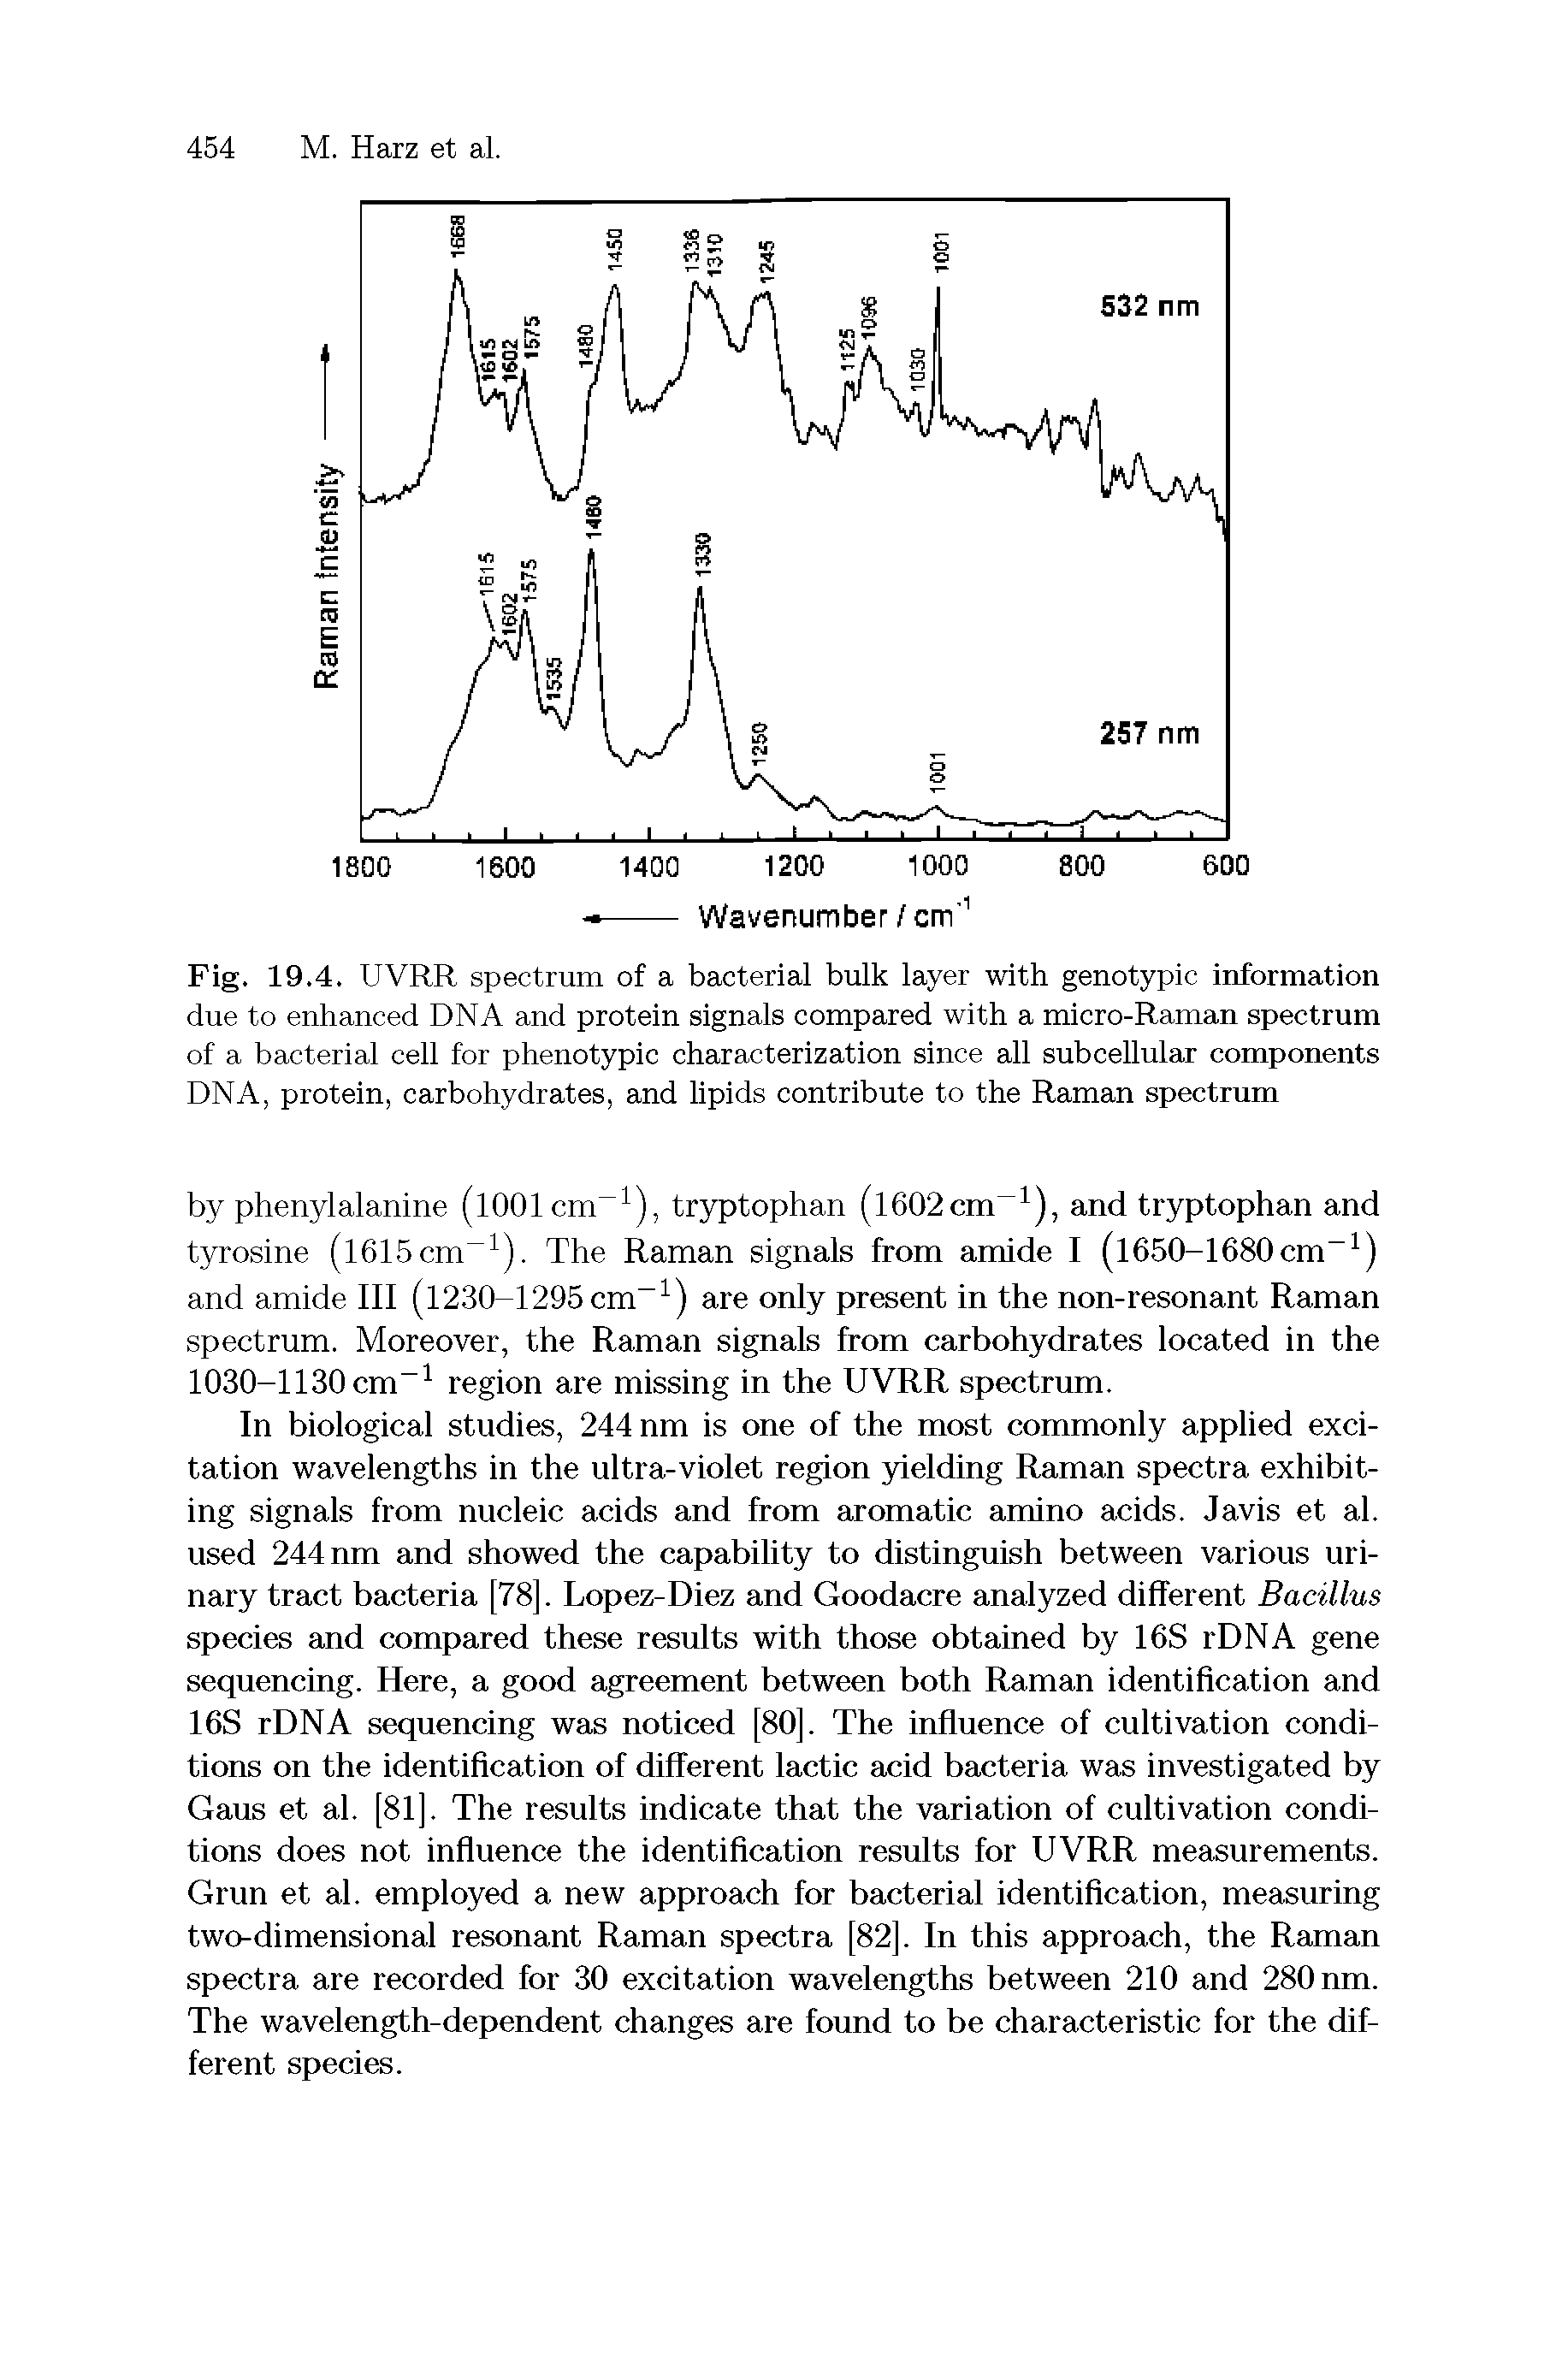 Fig. 19.4. UVRR spectrum of a bacterial bulk layer with genotypic information due to enhanced DNA and protein signals compared with a micro-Raman spectrum of a bacterial cell for phenotypic characterization since all subcellular components DNA, protein, carbohydrates, and lipids contribute to the Raman spectrum...